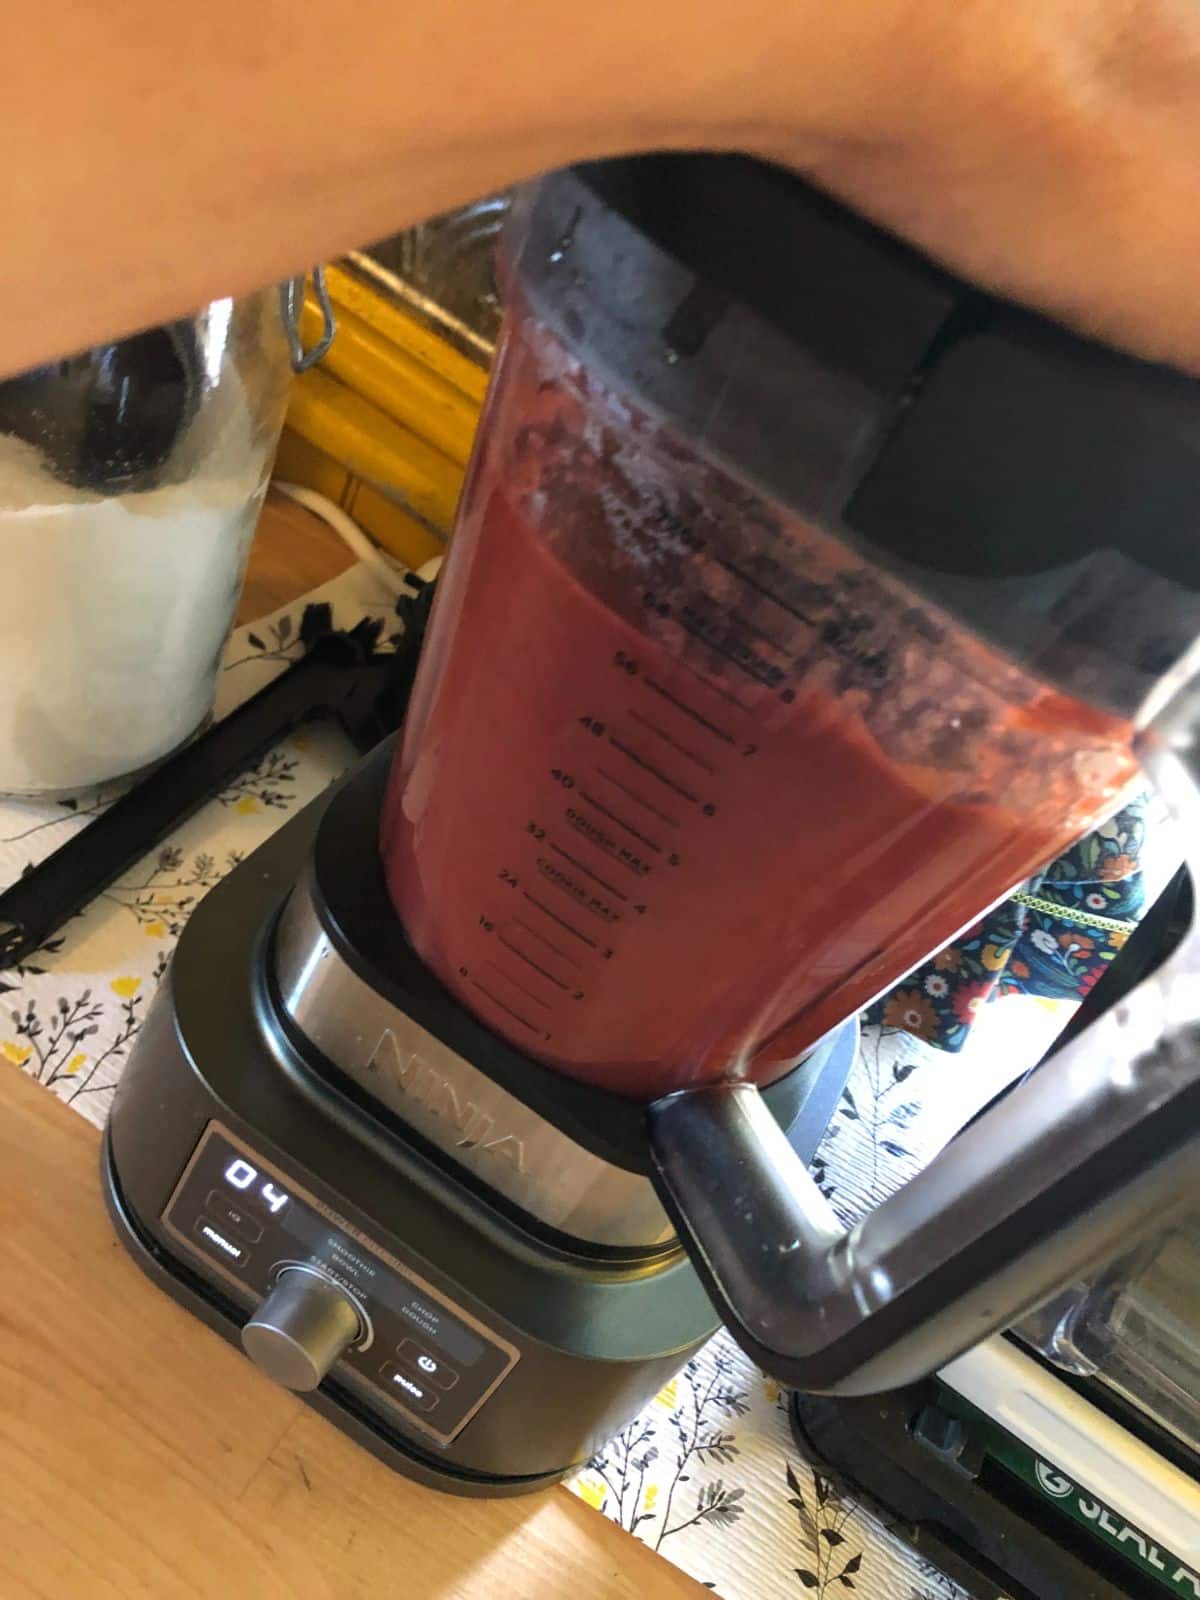 Smooth strawberry puree for making fruit leather